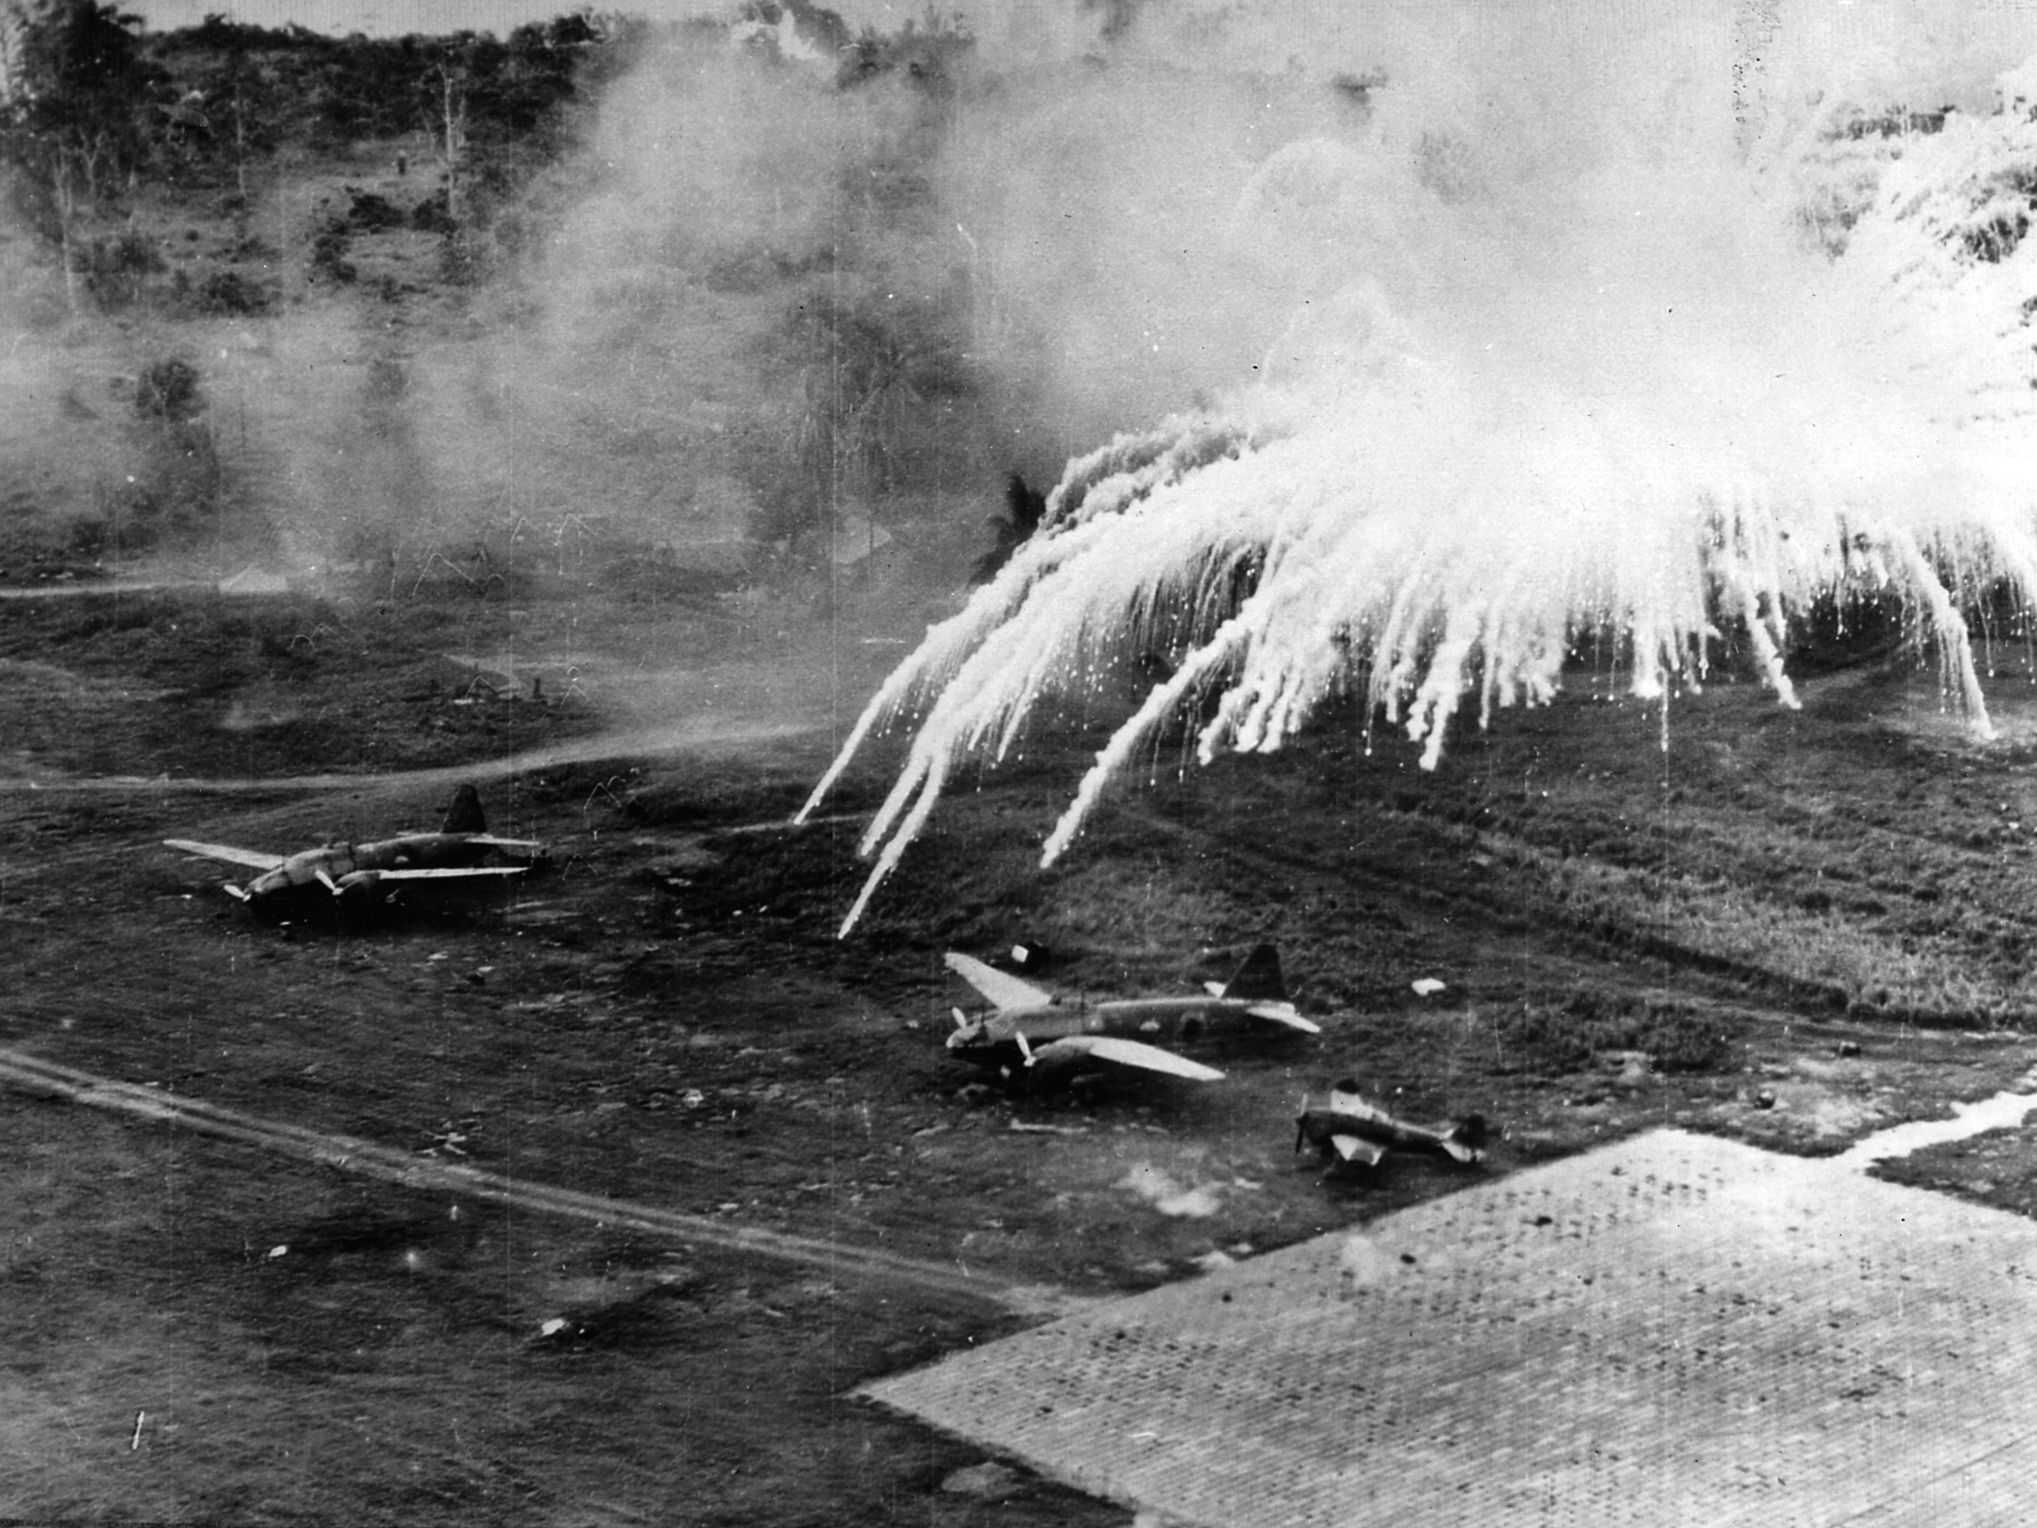 Explosions rock a Japanese air field near Rabaul. American B-25s and P-38s from the Fifth Air Force hammered the site unmercifully.